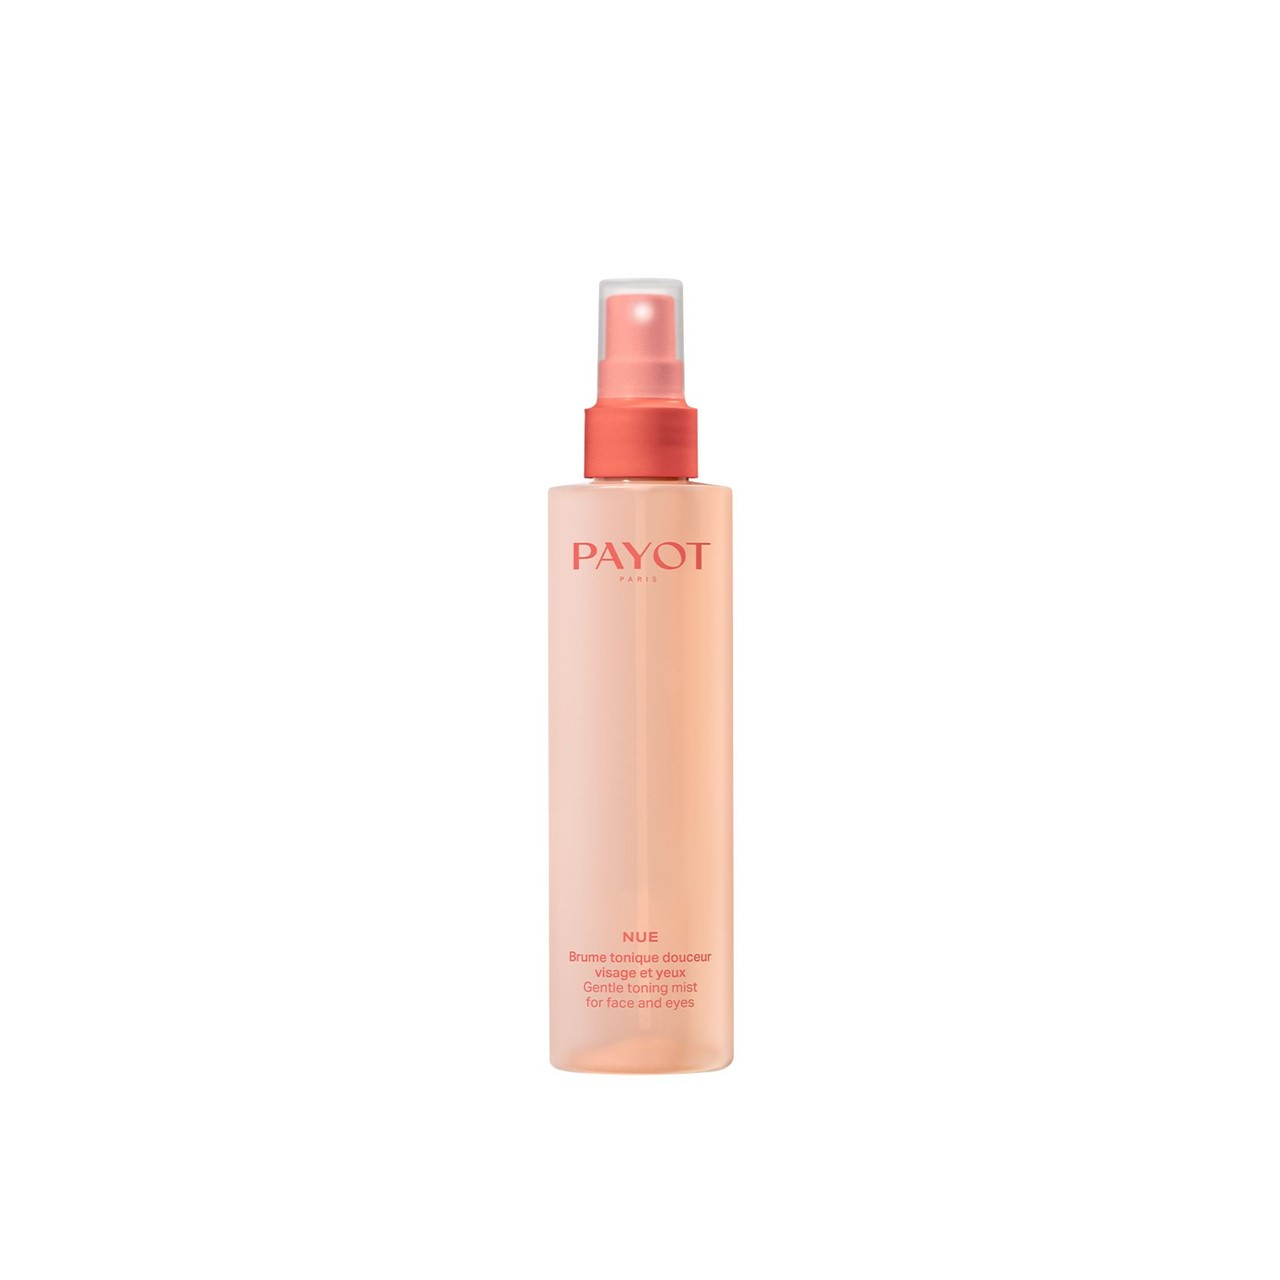 Payot Nue Gentle Toning Mist for Face and Eyes 200ml